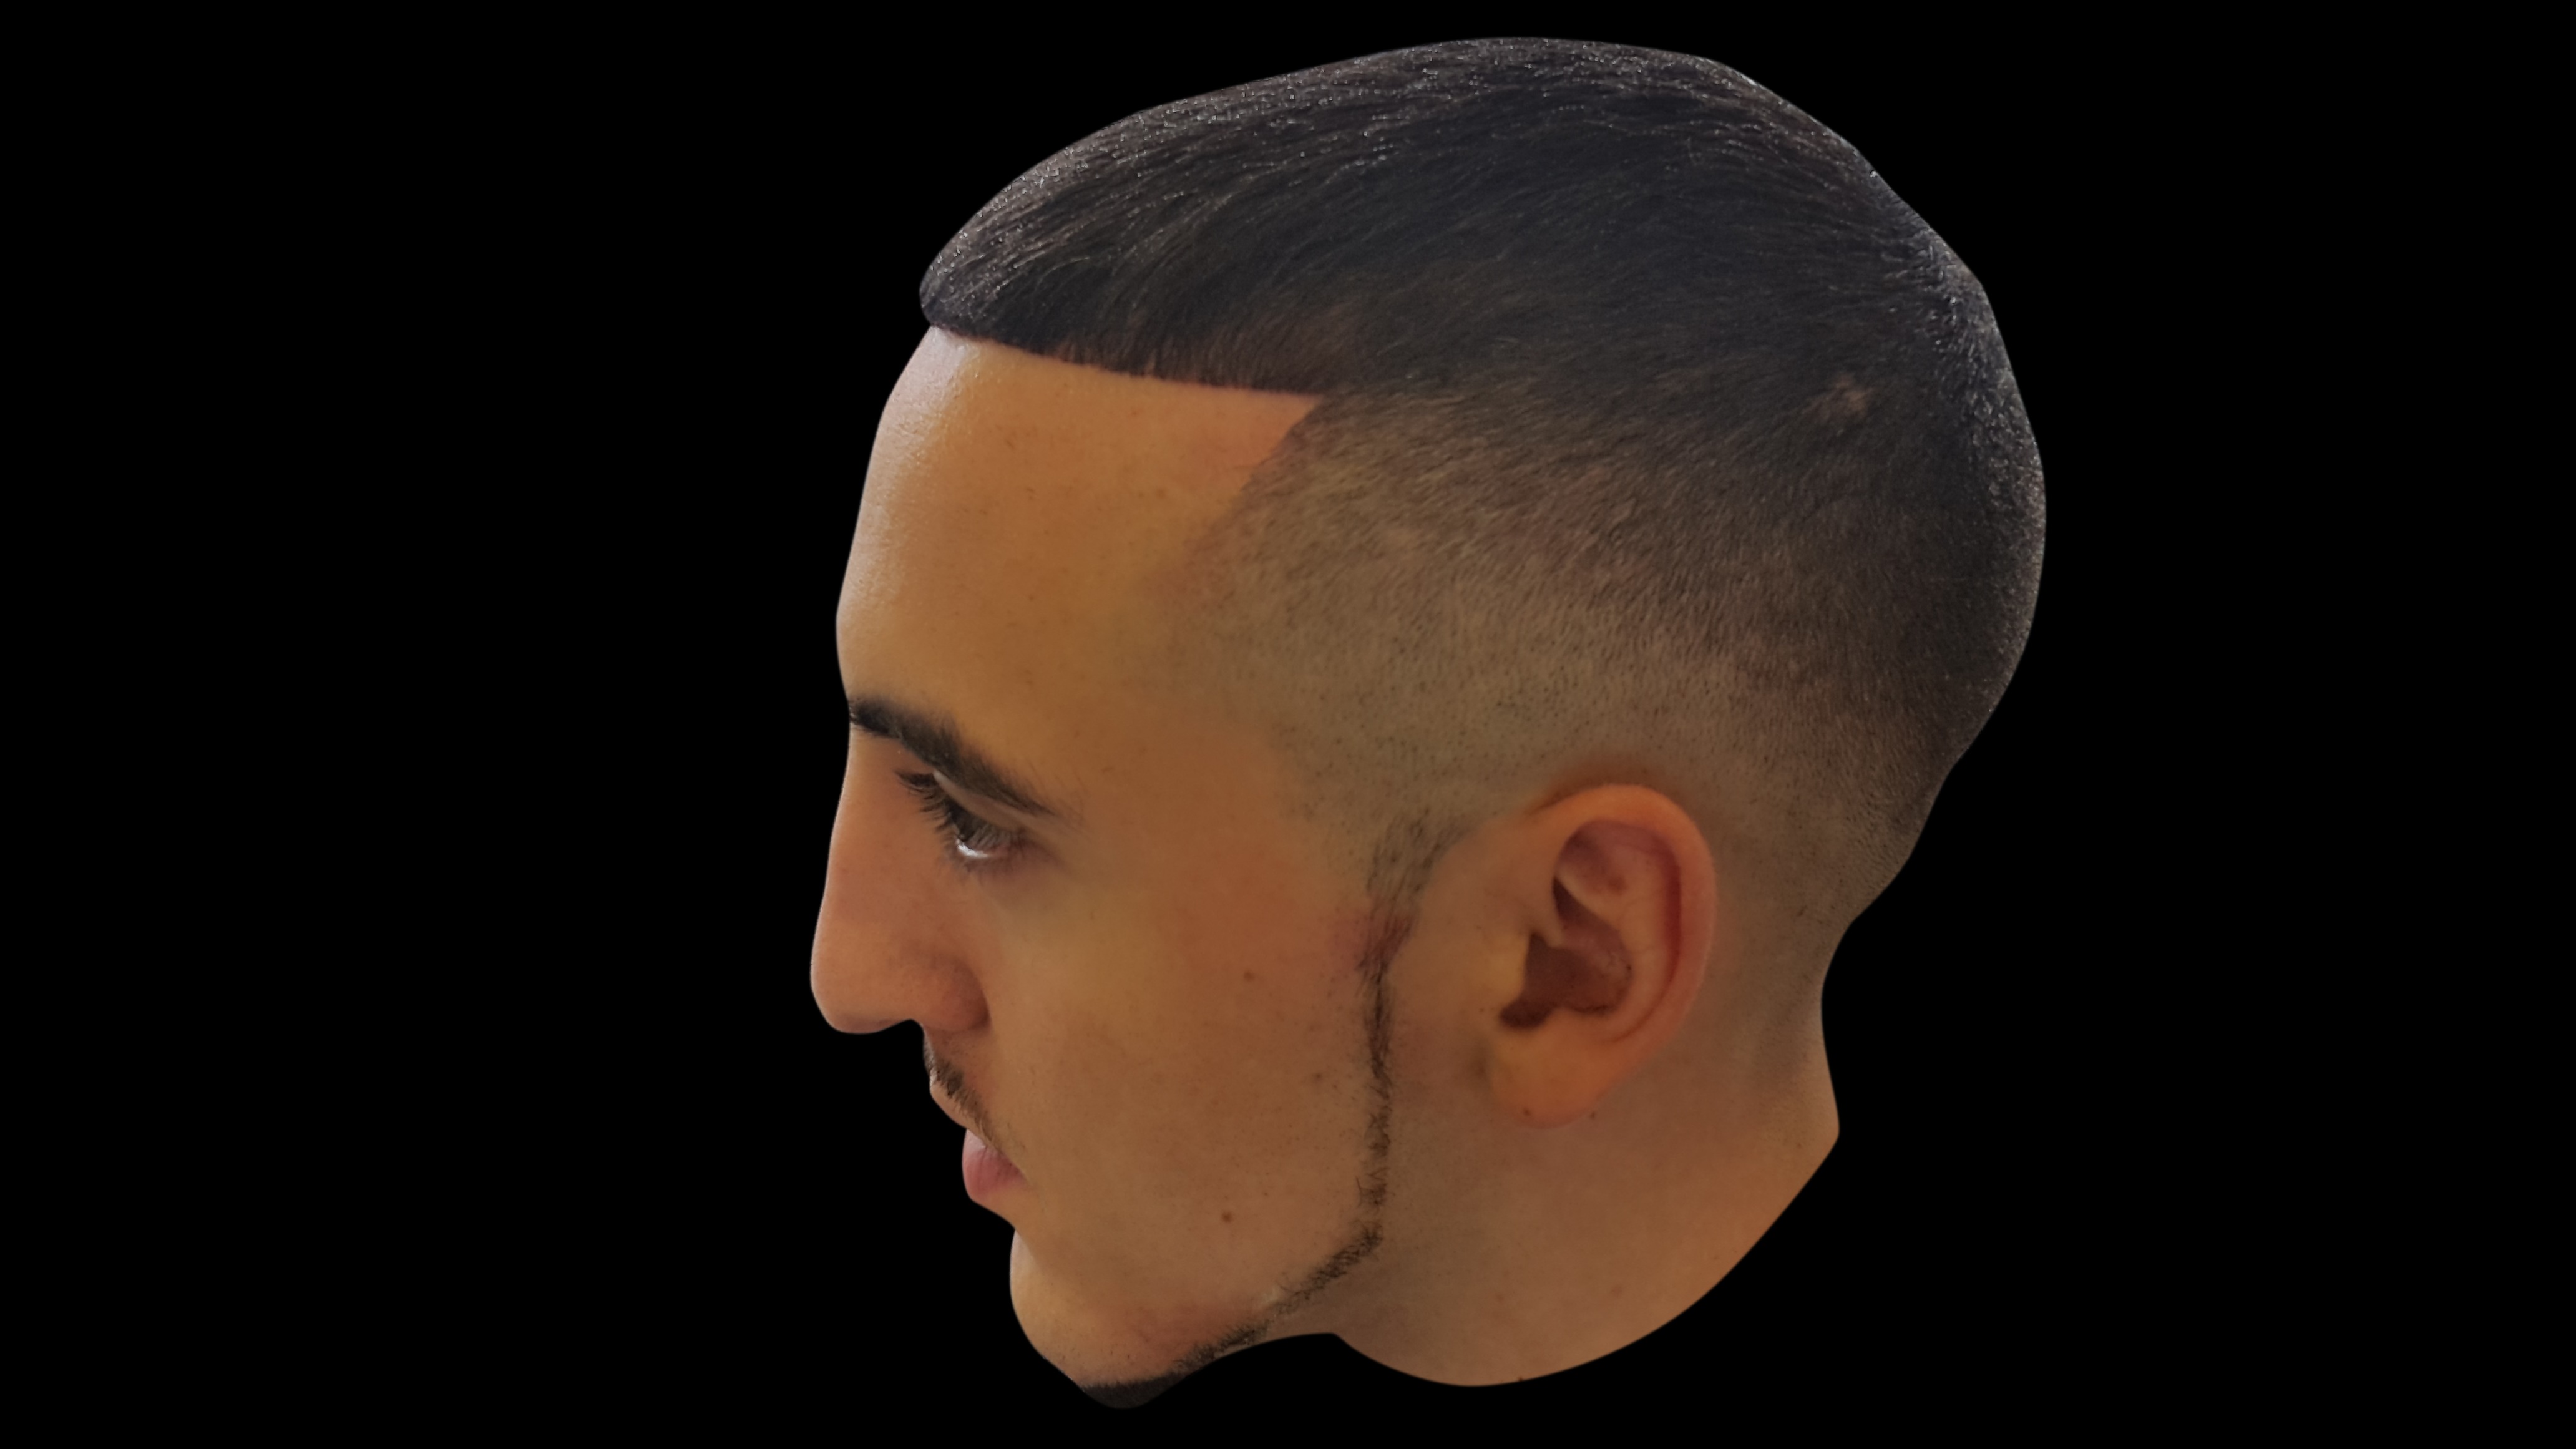 Clean Fade into a level 3 on the top